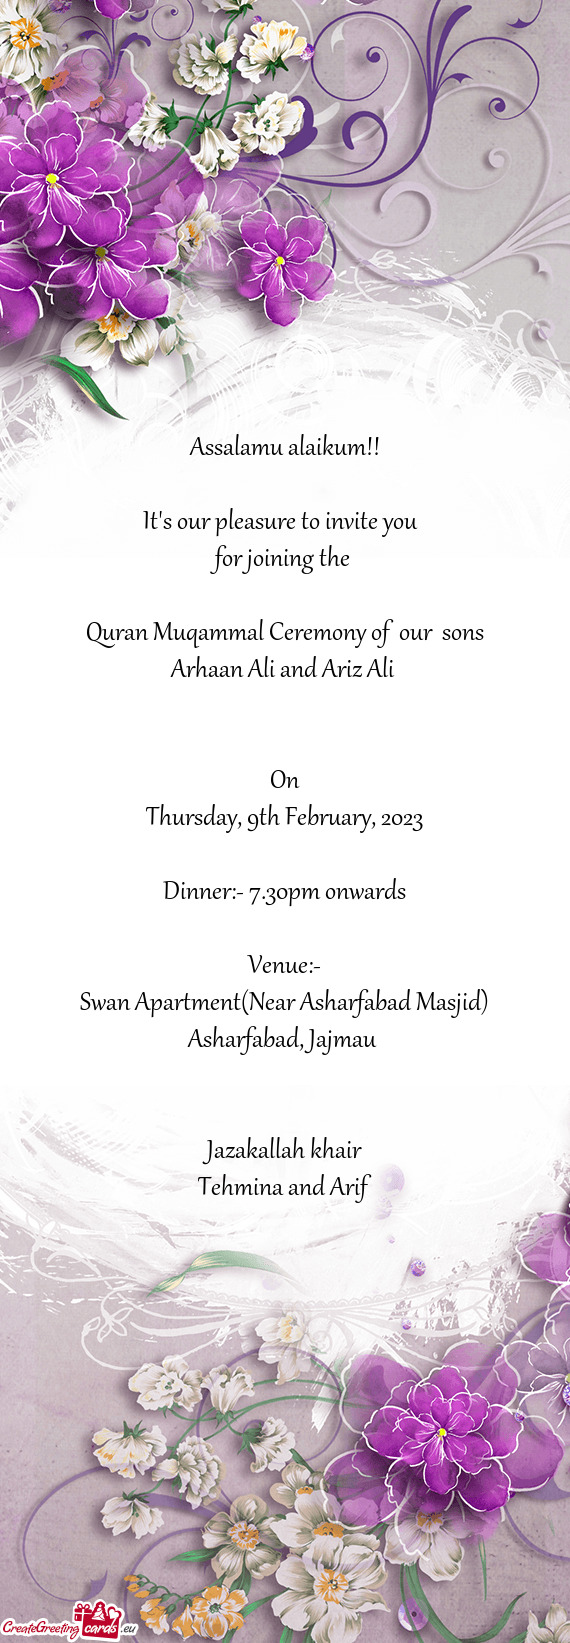 Quran Muqammal Ceremony of our sons